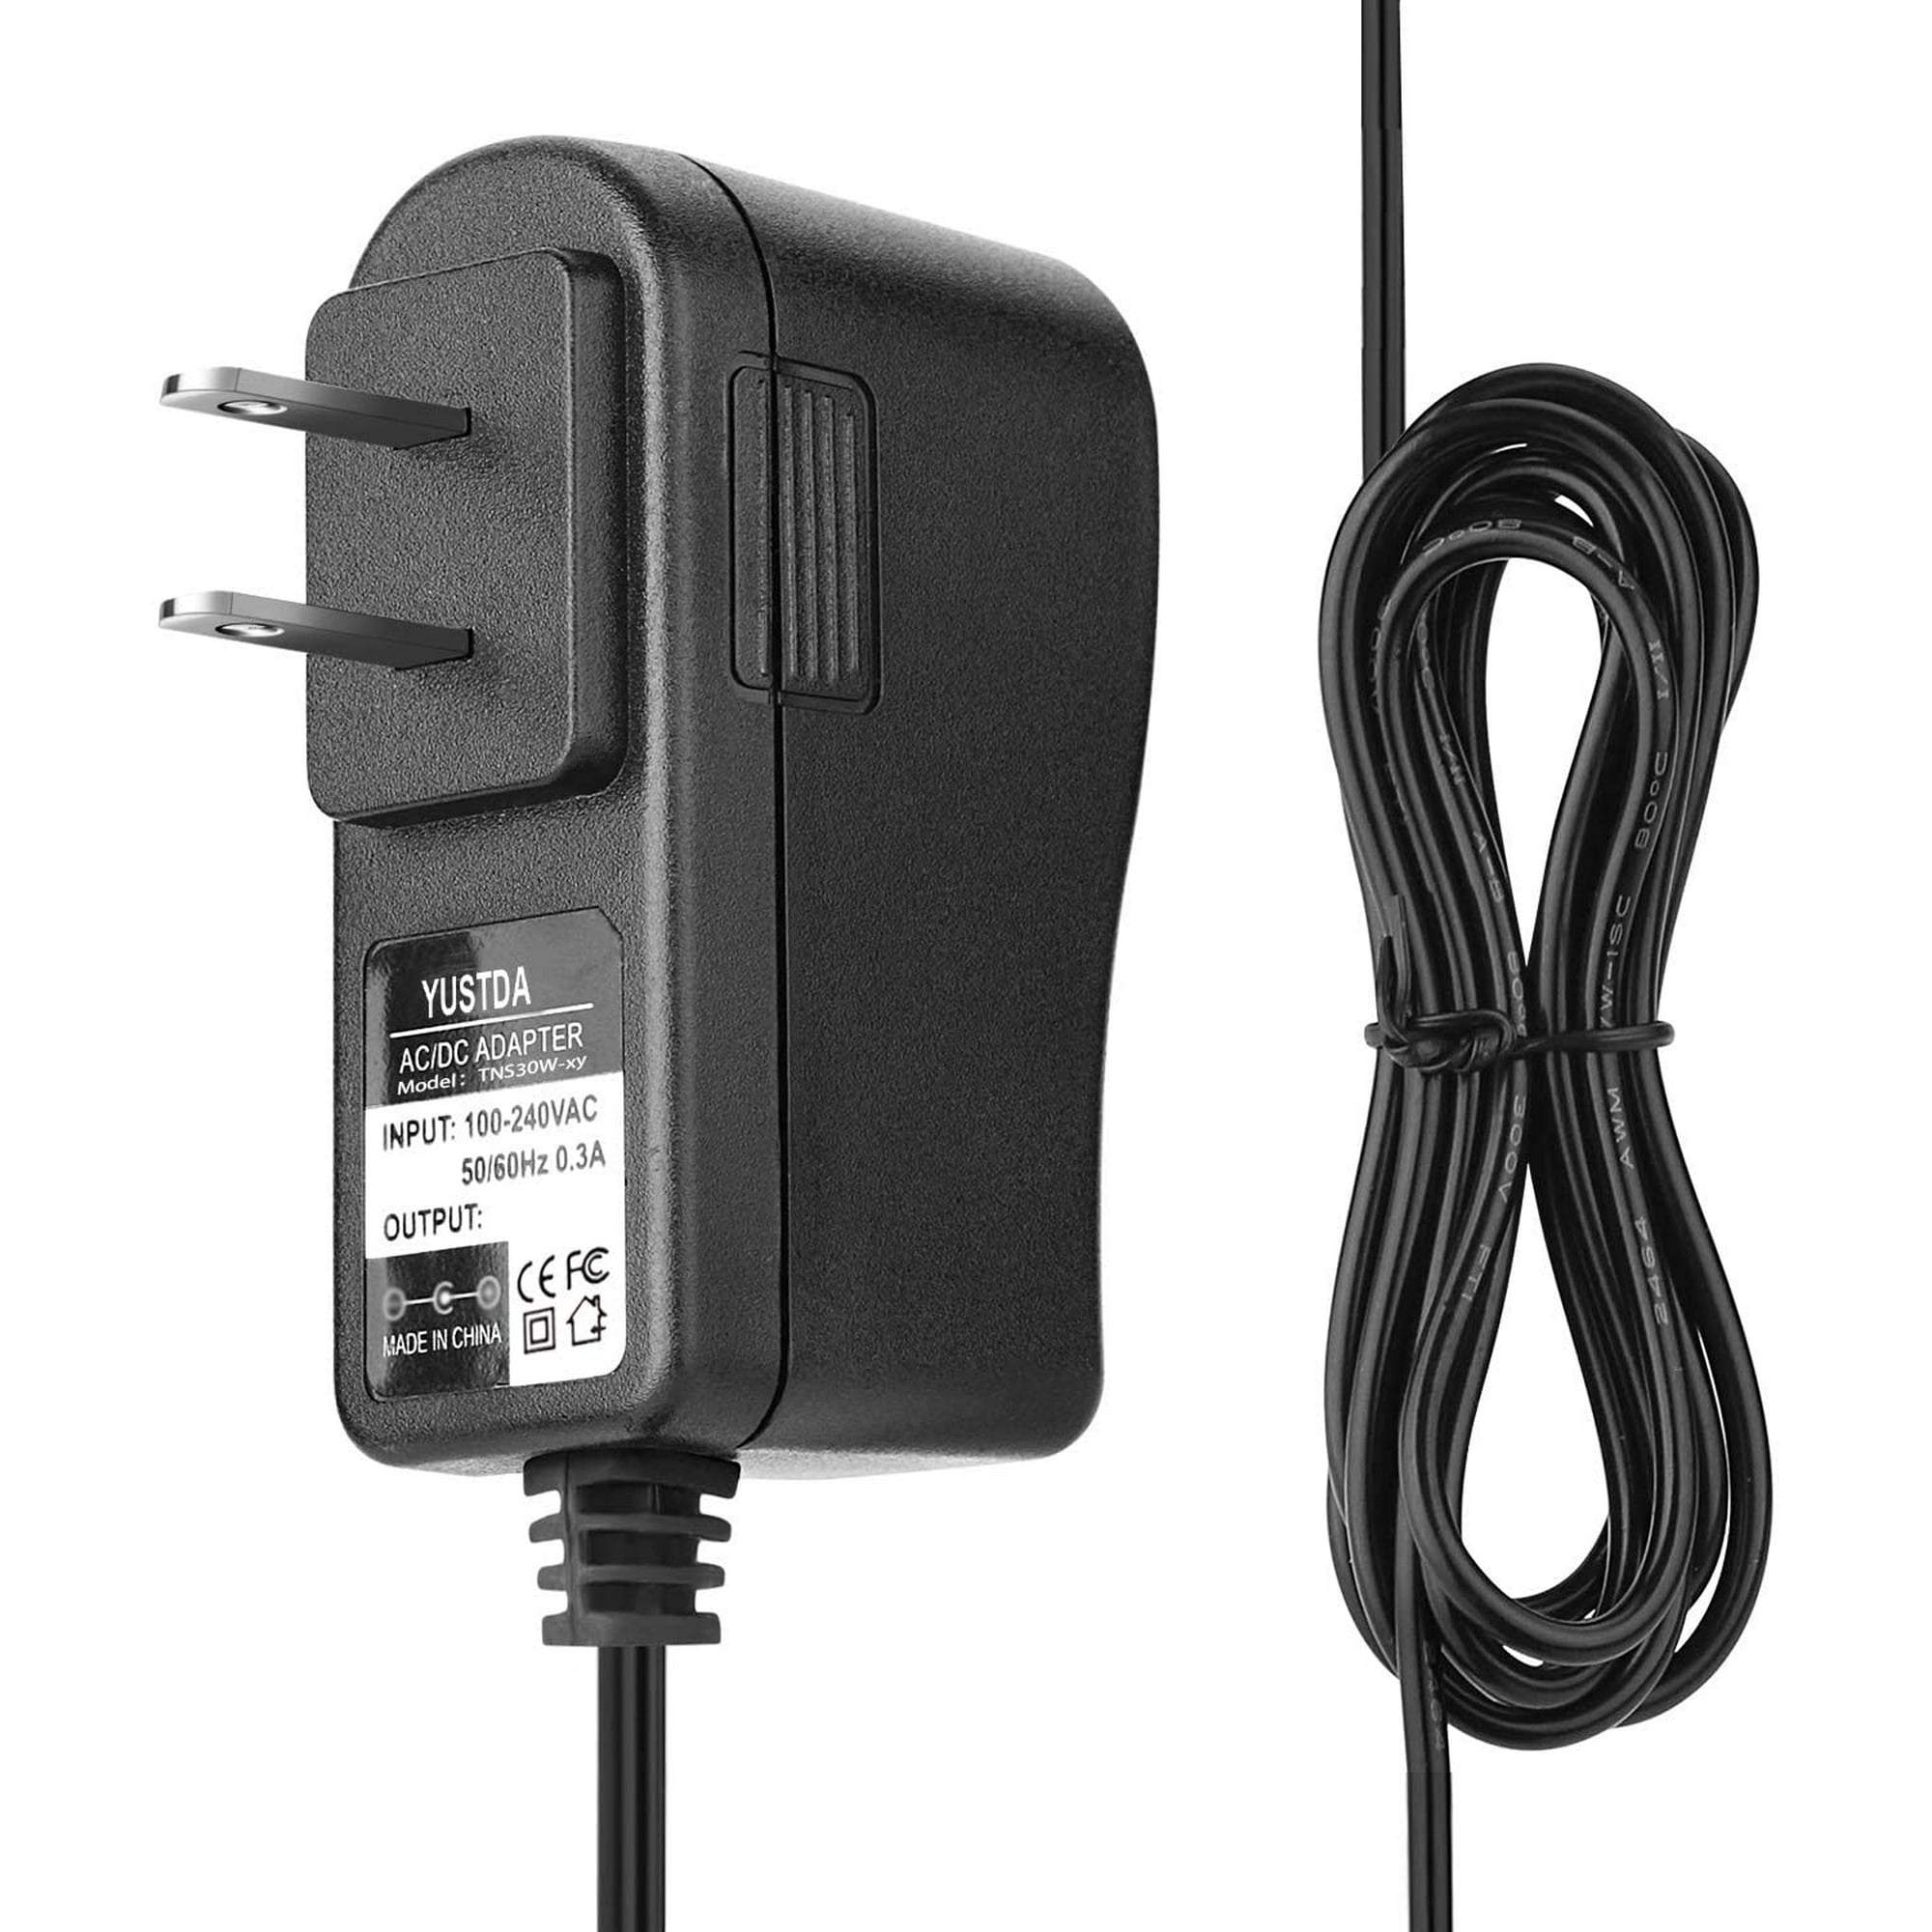 Yustda New AC/DC Adapter for Fujitsu fi-65F PA03595-B001 PA03595-B005 fi65F Flatbed Scanner PA03643-B205 ScanSnap S1300i S1300 i 7.2V - 7.5V Power Supply Cord Cable Charger Mains PSU - image 1 of 4